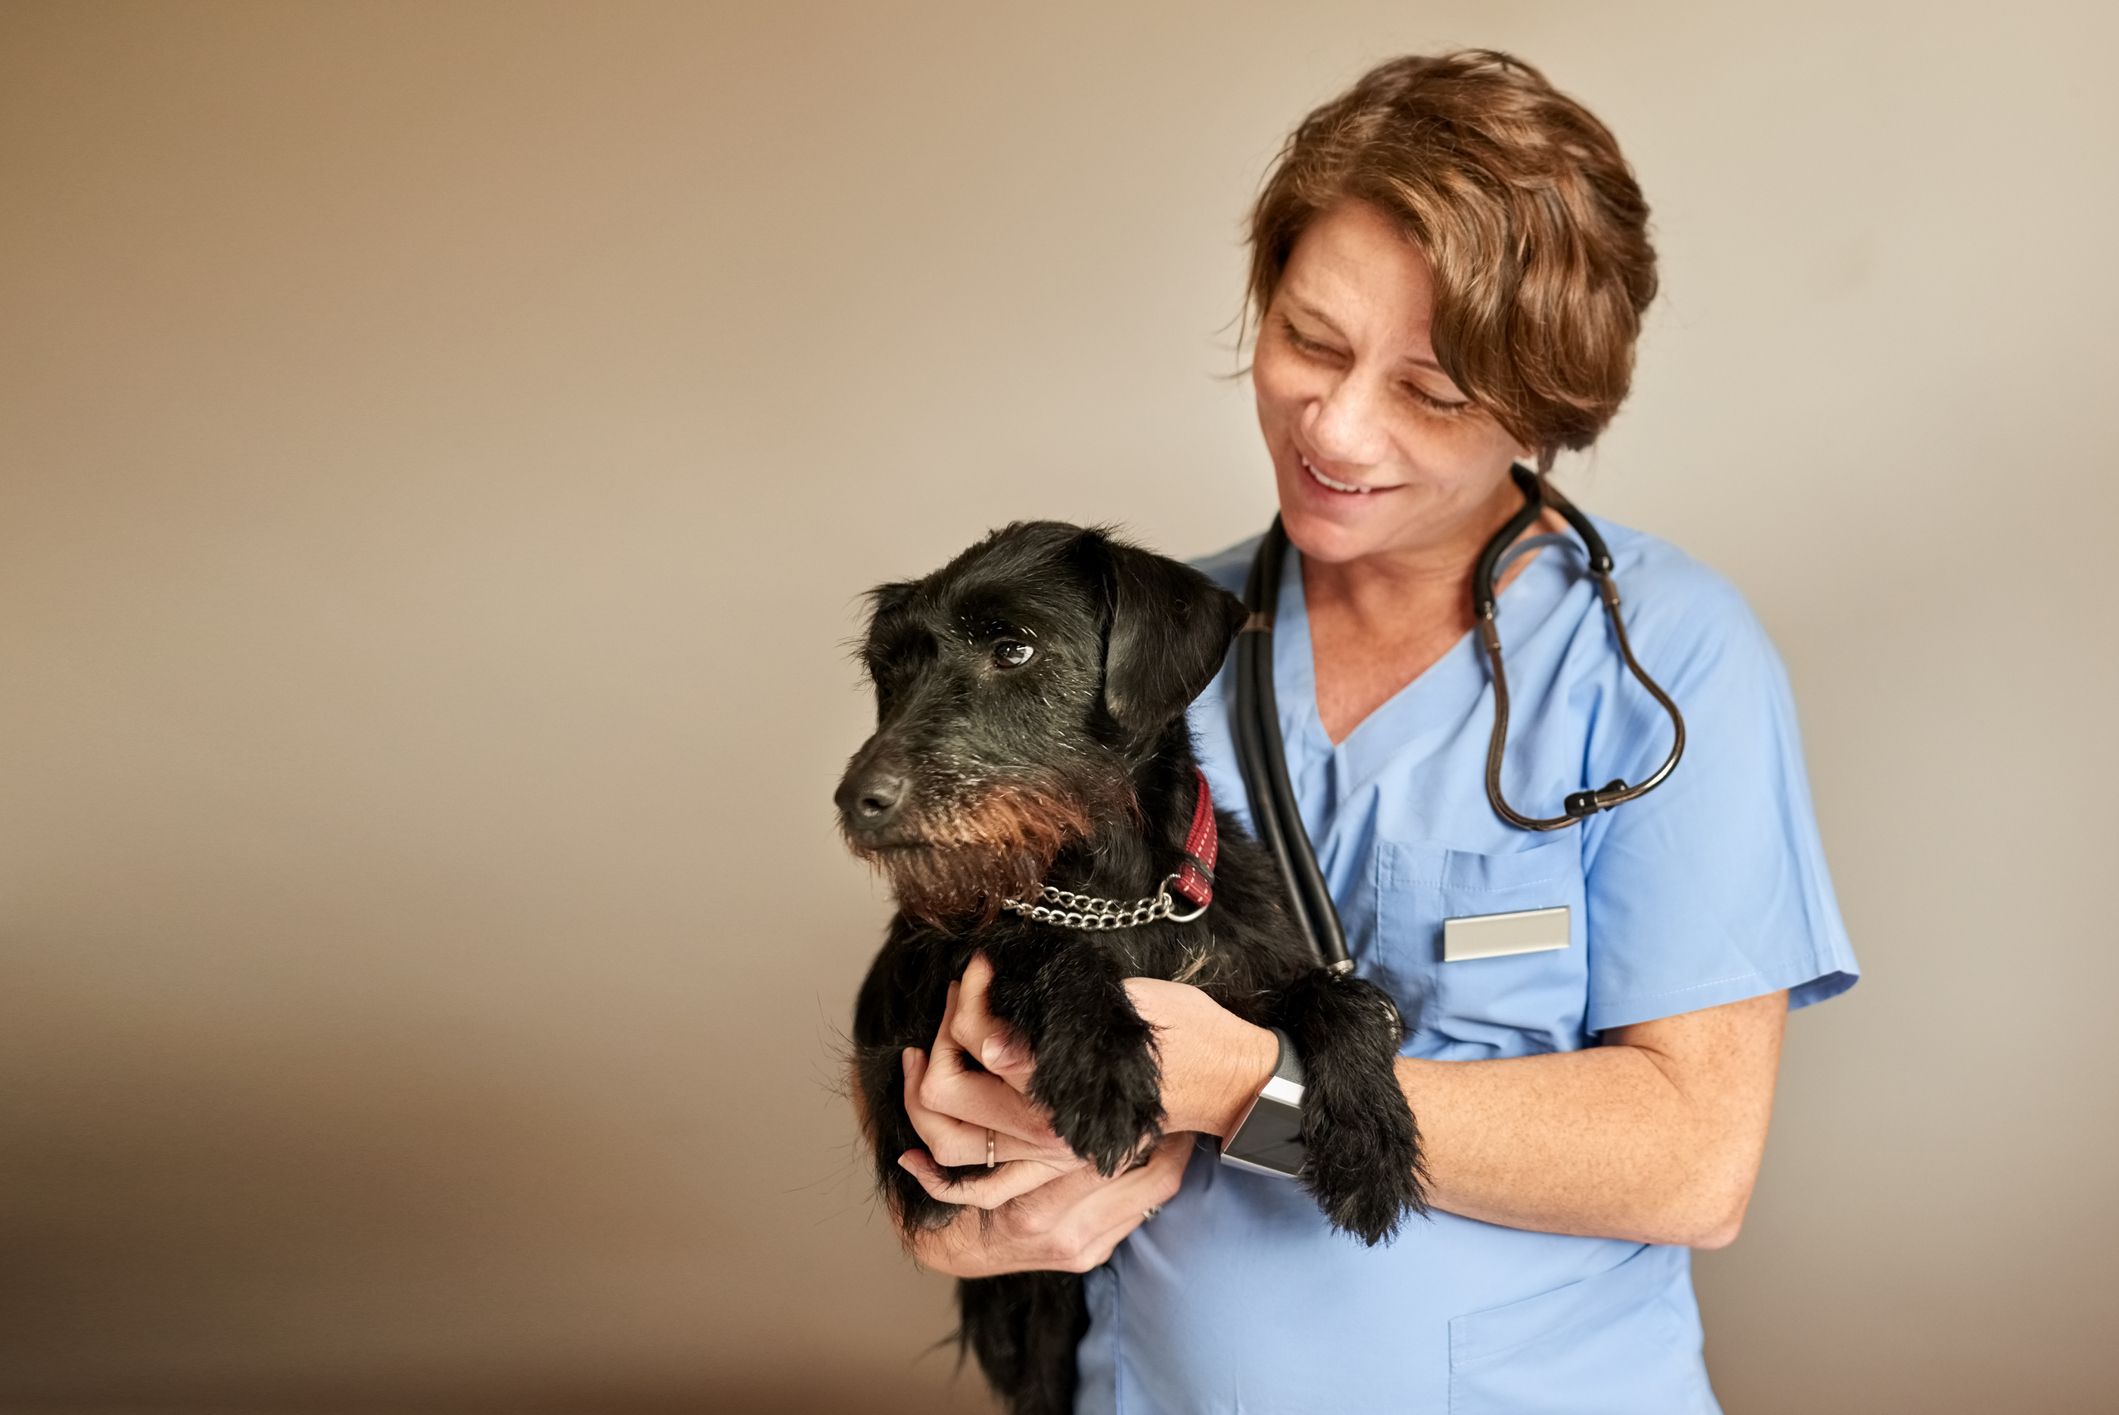 How Long Can A Dog Live With Untreated Diabetes?